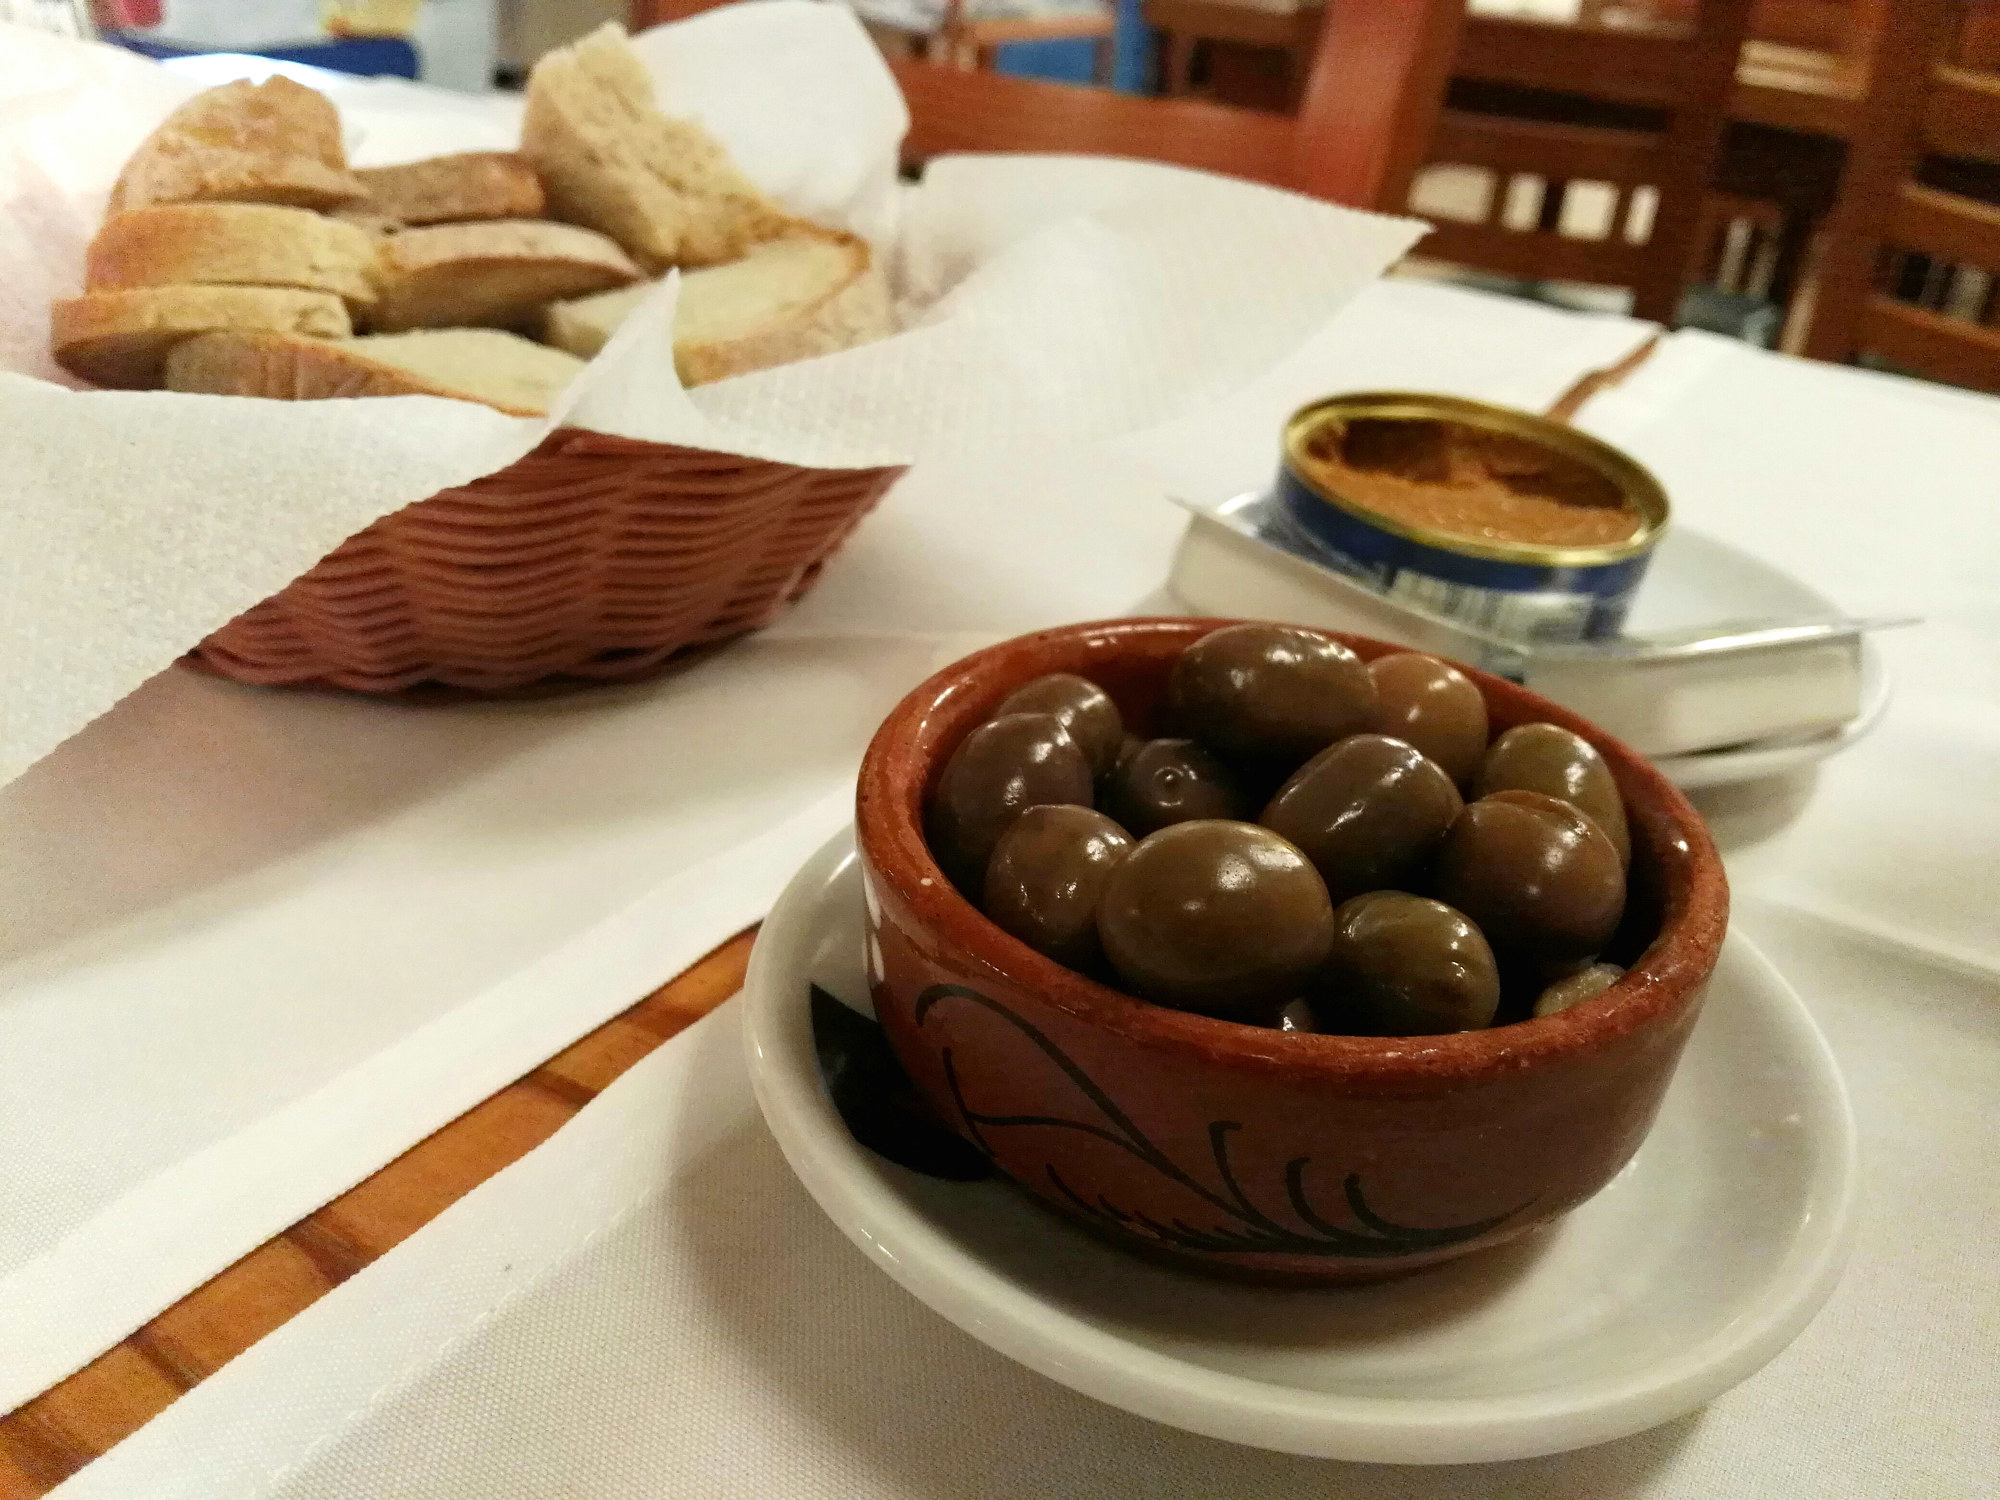 Olives and bread on a tabletop.